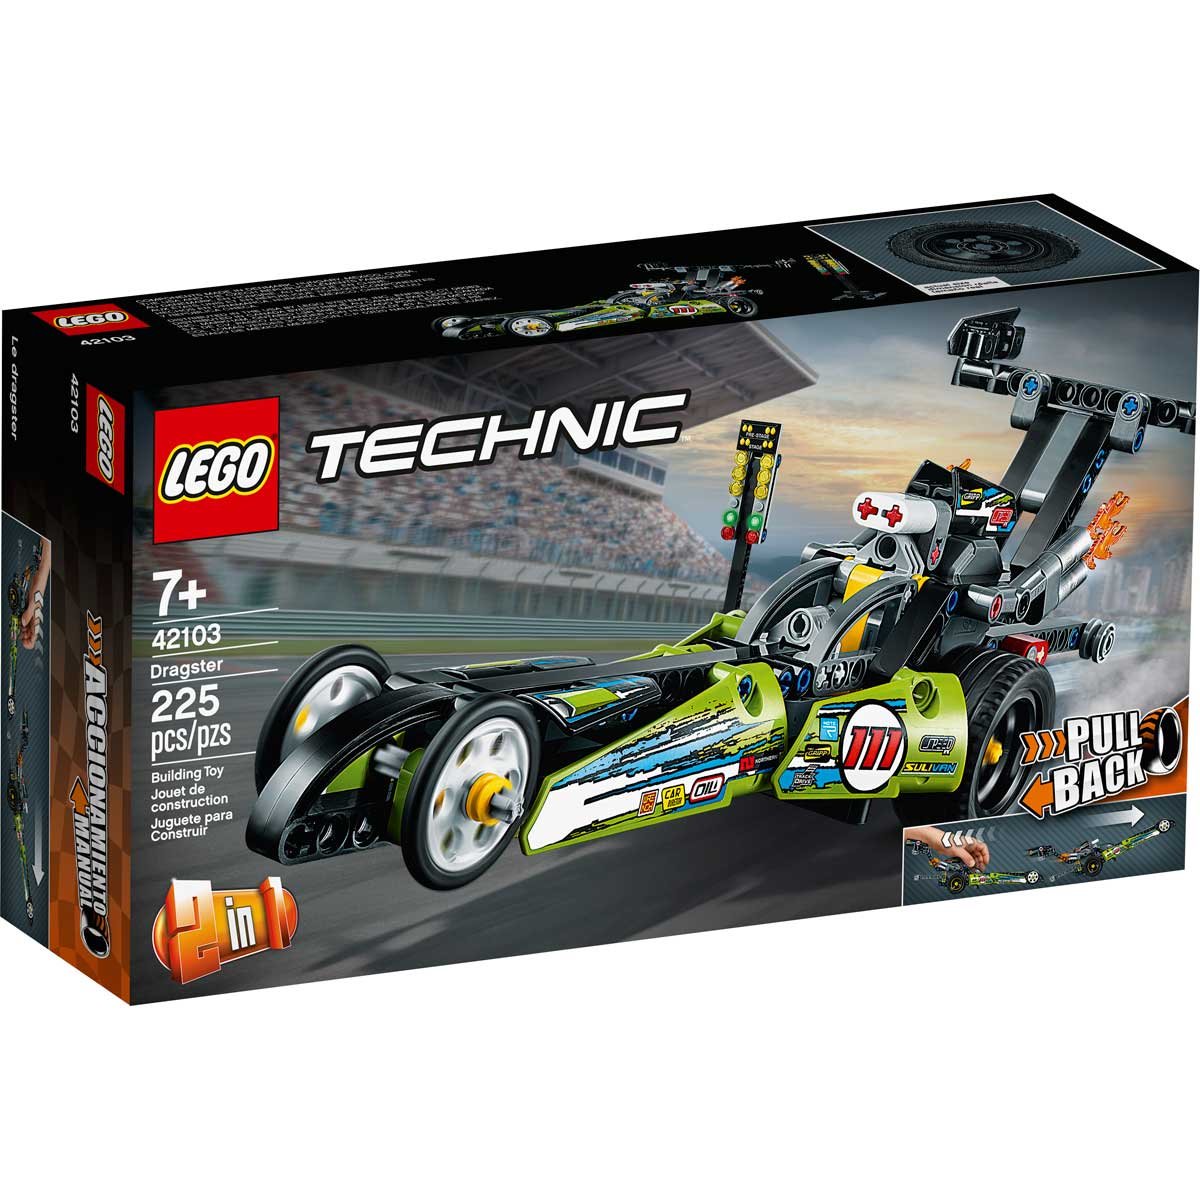 Dragster Lego Technic